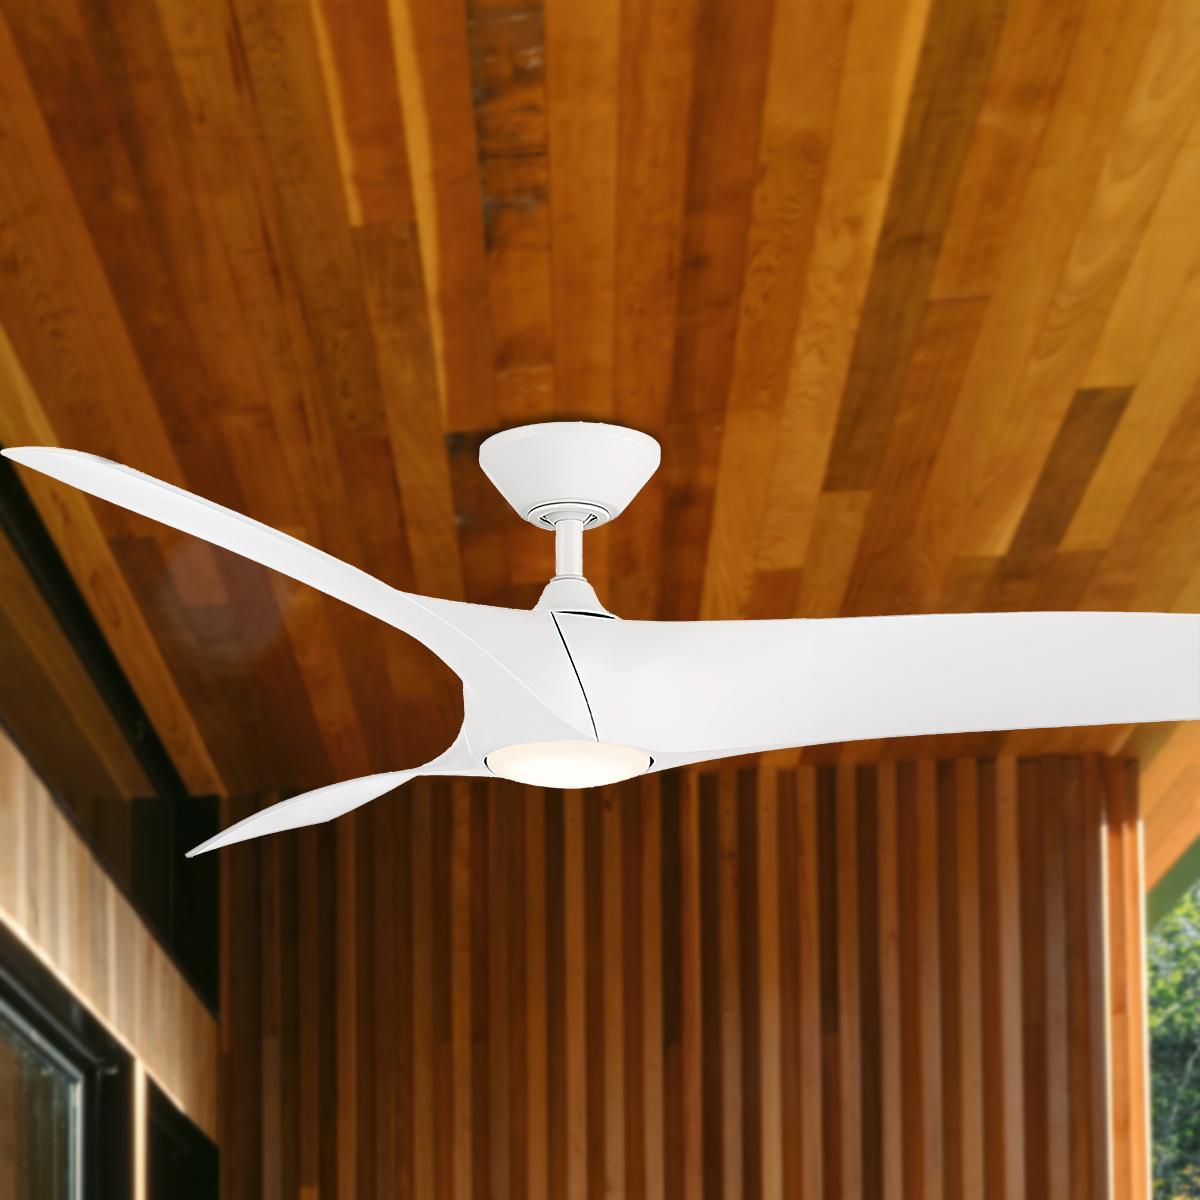 Zephyr 52 Inch Farmhouse Outdoor Smart Ceiling Fan With 3000K Light And Remote